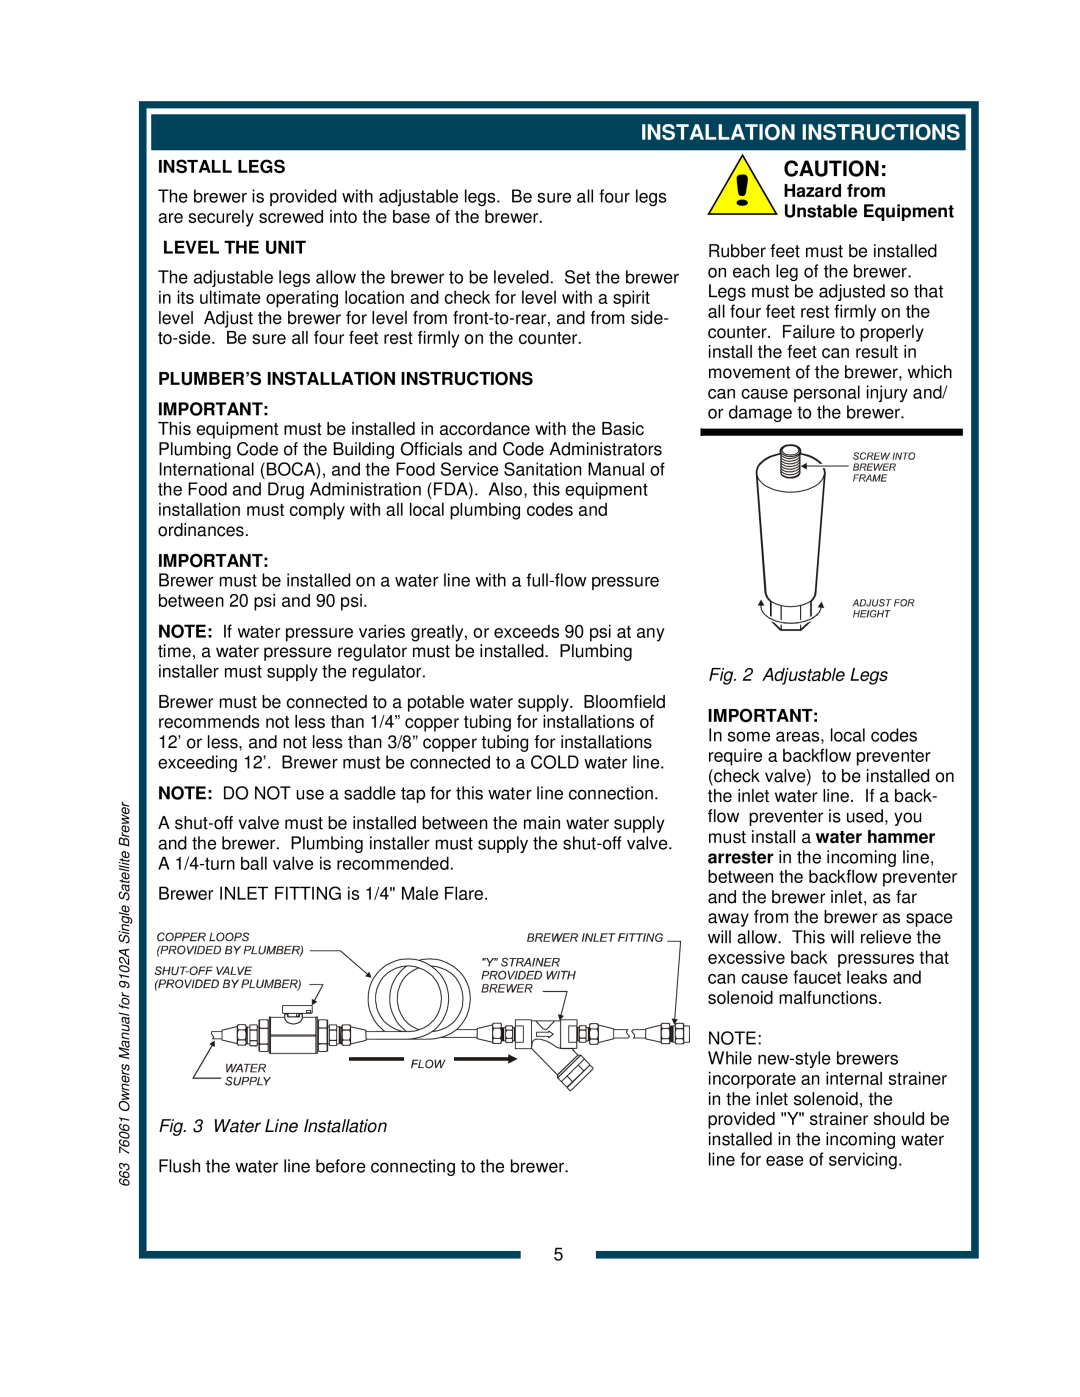 Bloomfield 9104A Install Legs, Level The Unit, Plumber’S Installation Instructions, Hazard from Unstable Equipment 